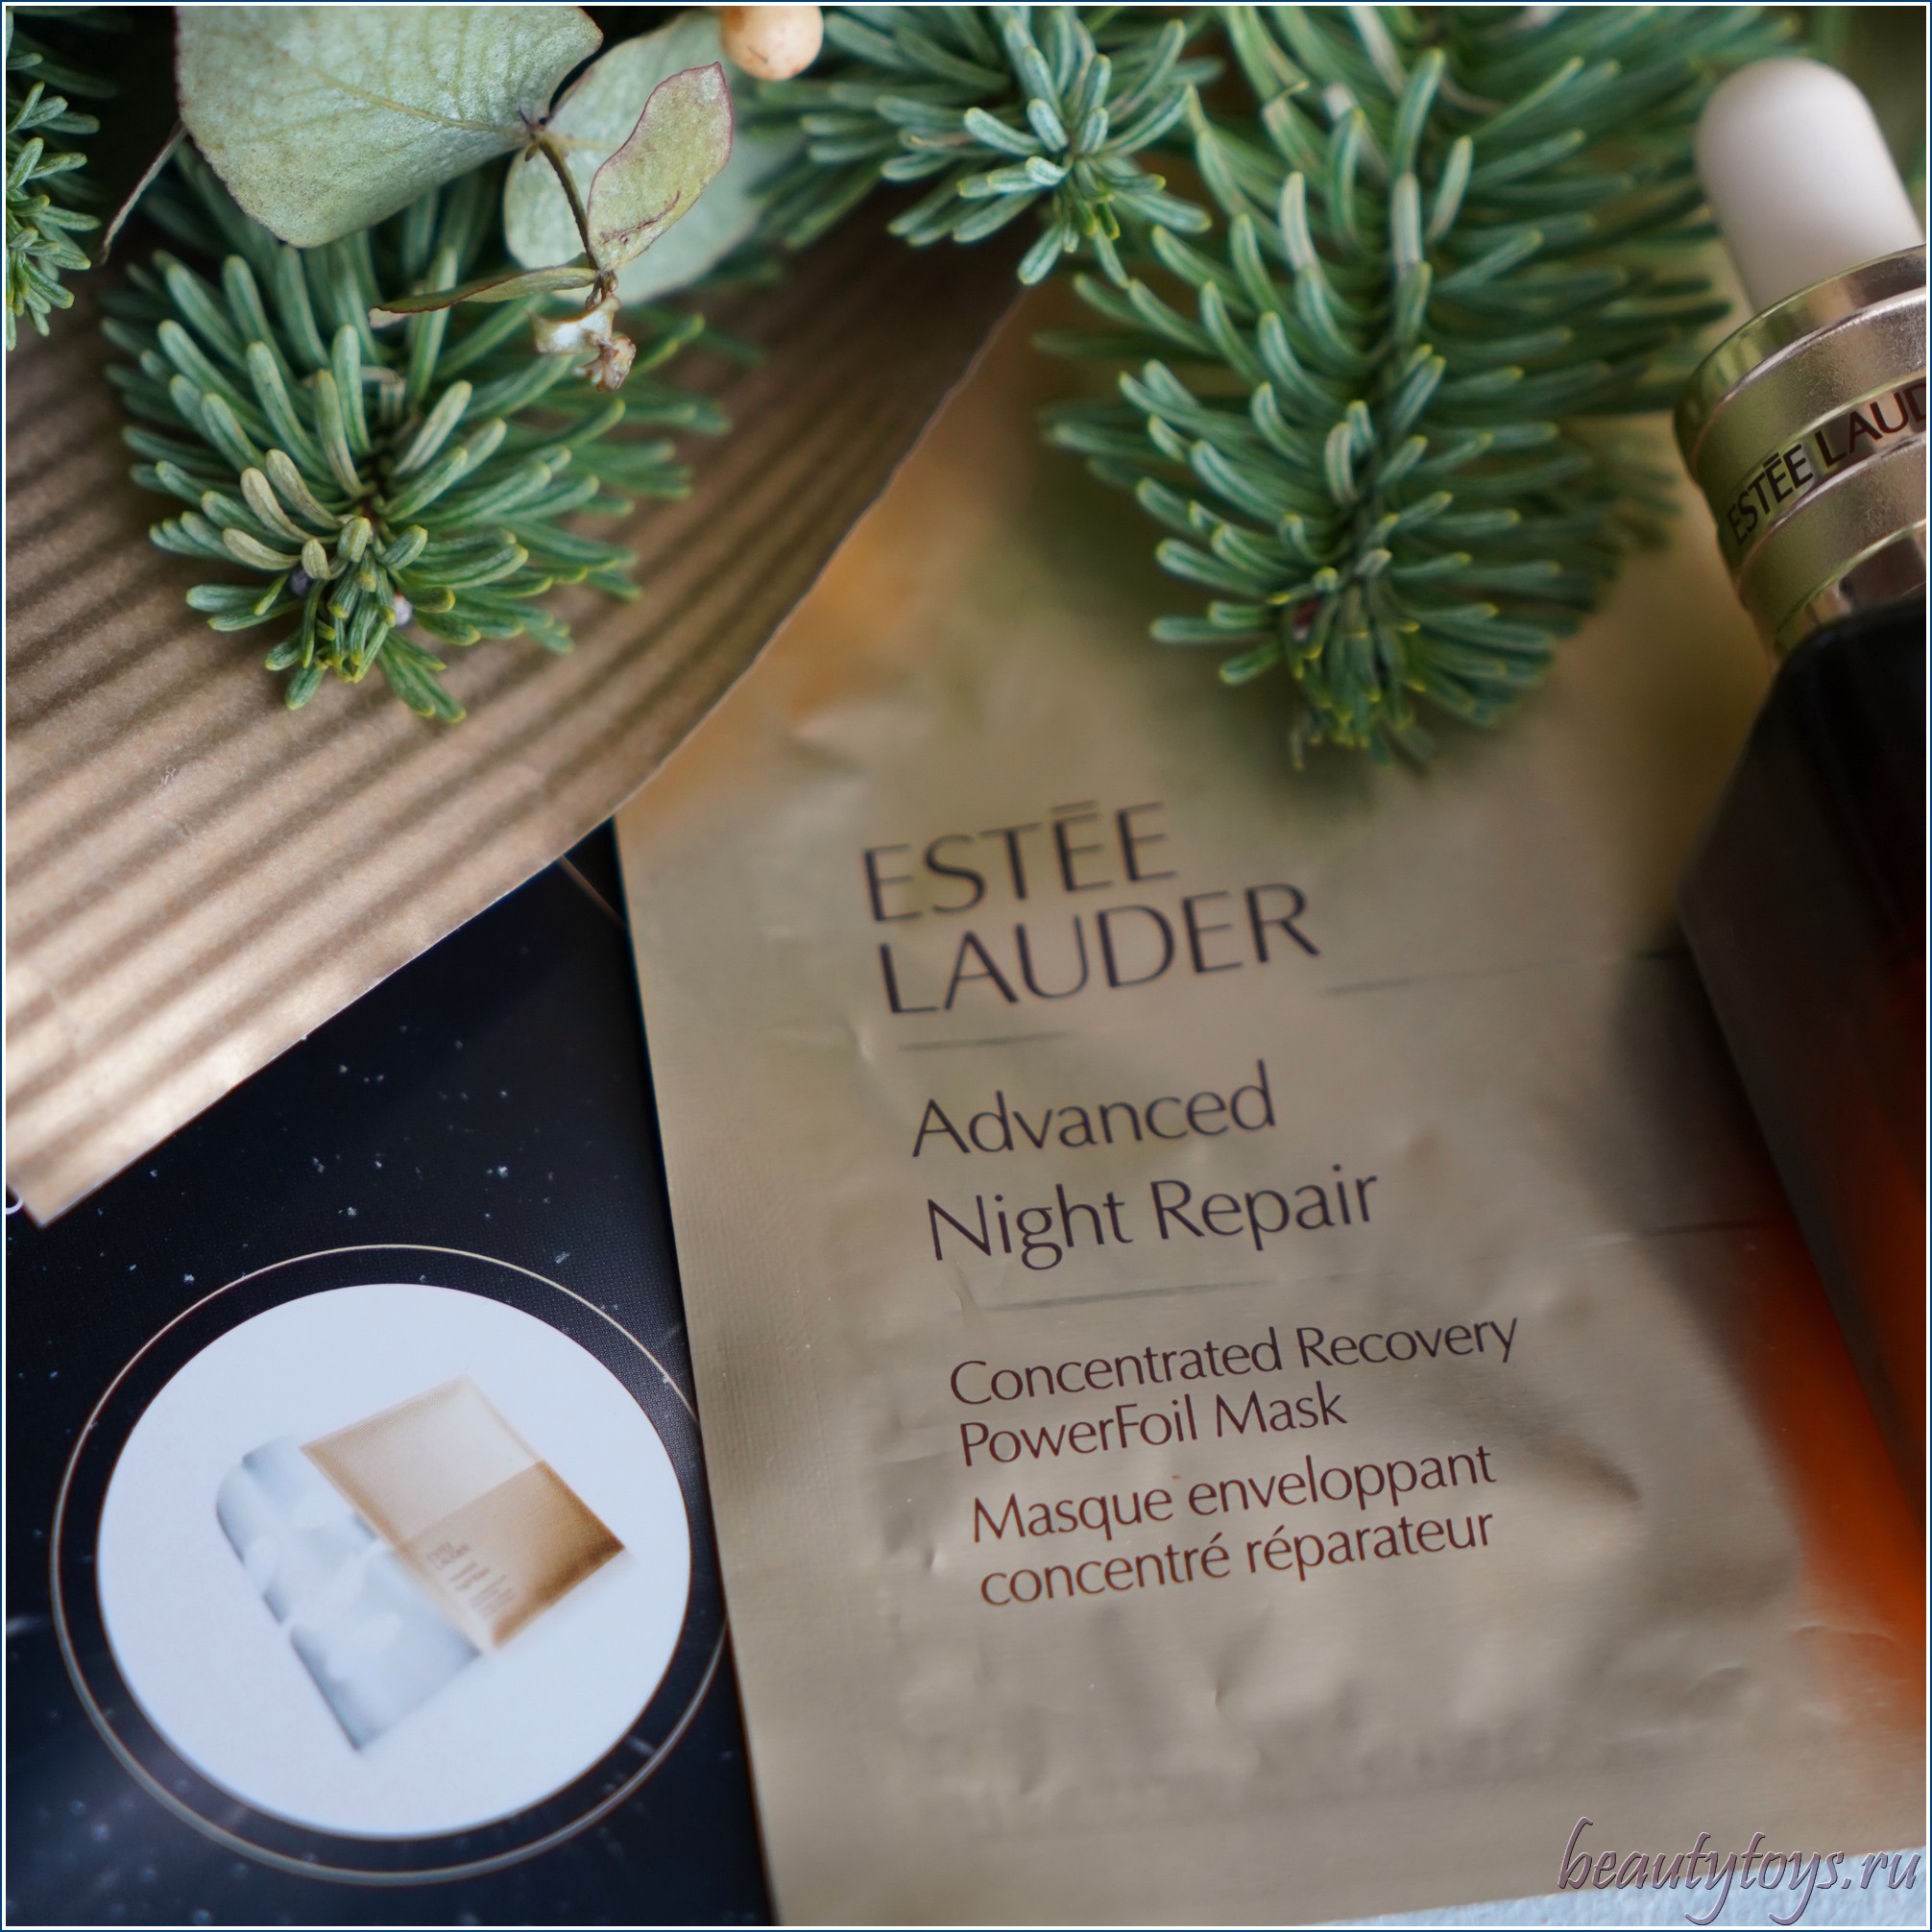 Маска night repair. Маска Estee Lauder Advanced Night. Estee Lauder Advanced Night Repair Concentrate Recovery POWERFOIL Mask. Advanced Night Repair Estee Lauder реклама. Advanced Night Repair Estee Lauder реклама девушка.